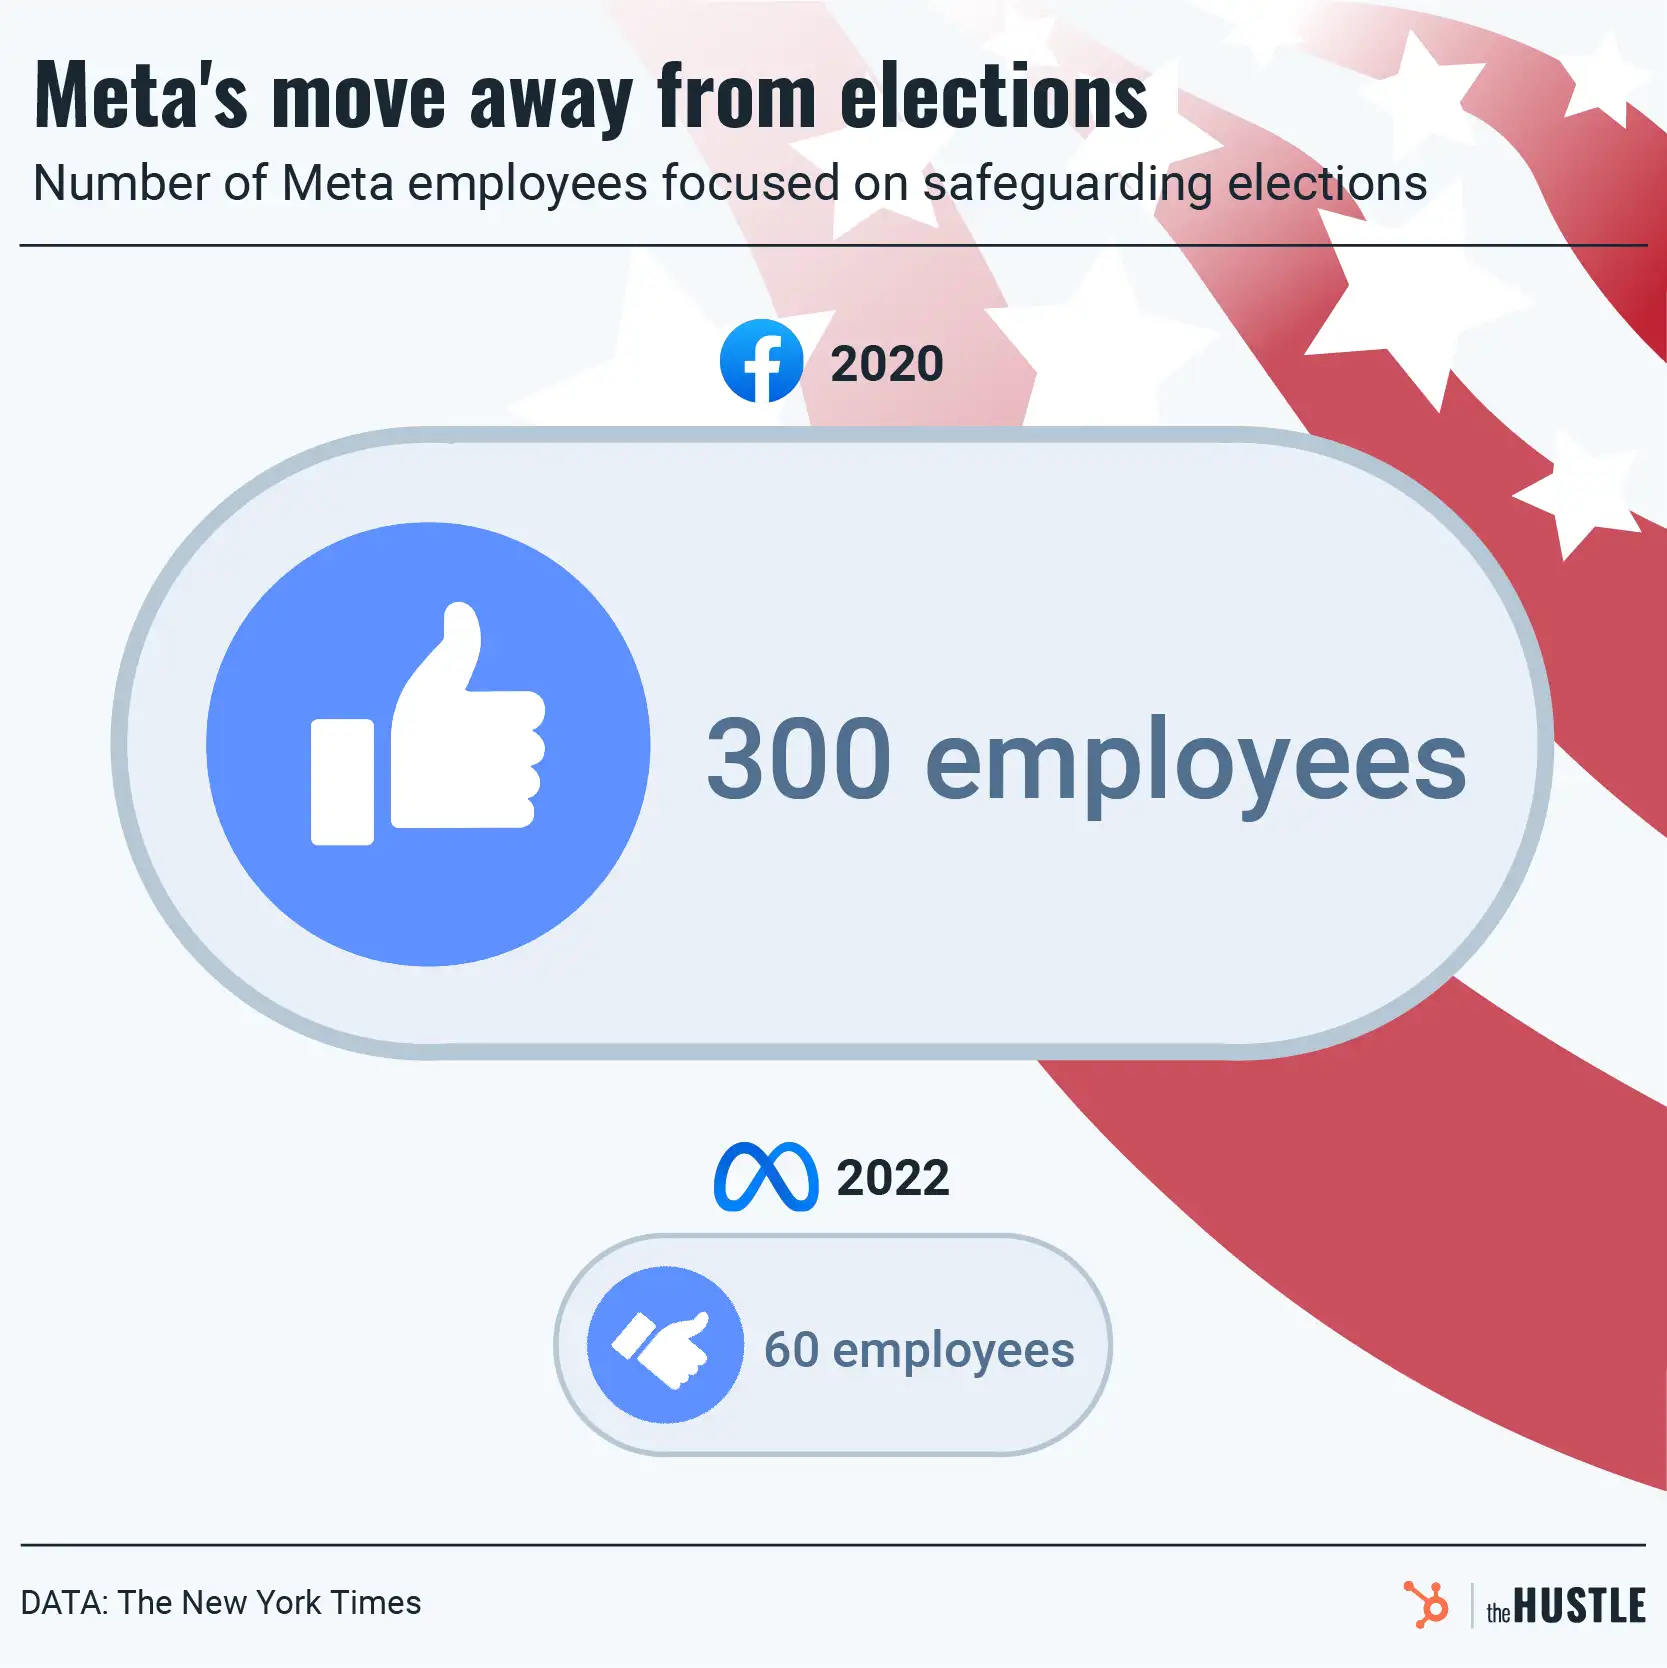 Have Meta’s election priorities shifted?